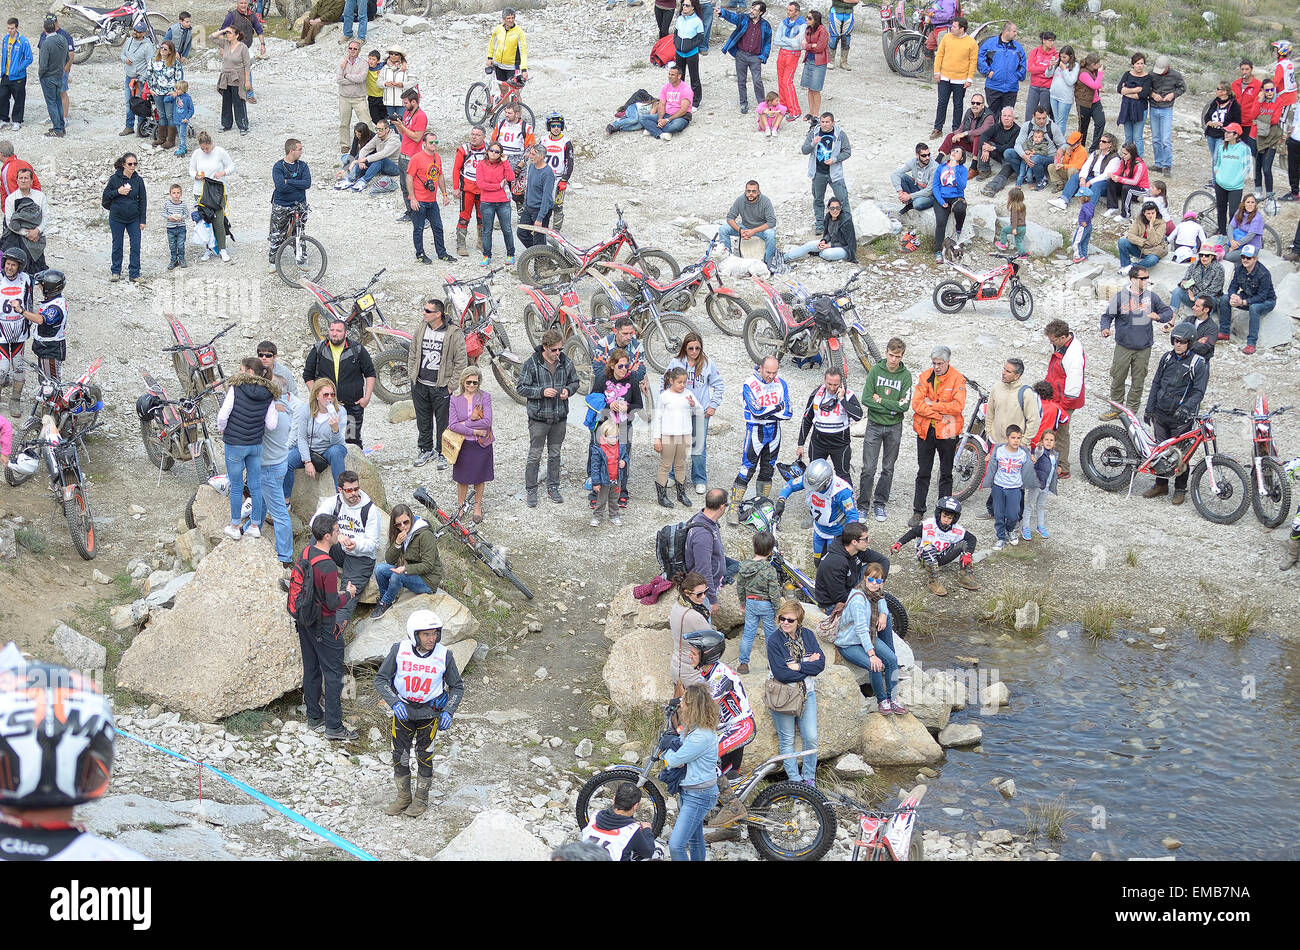 Spain trial championship. Unknown people are waiting at zone where motorcyclists must climb some rocks with their motorcycles. Stock Photo